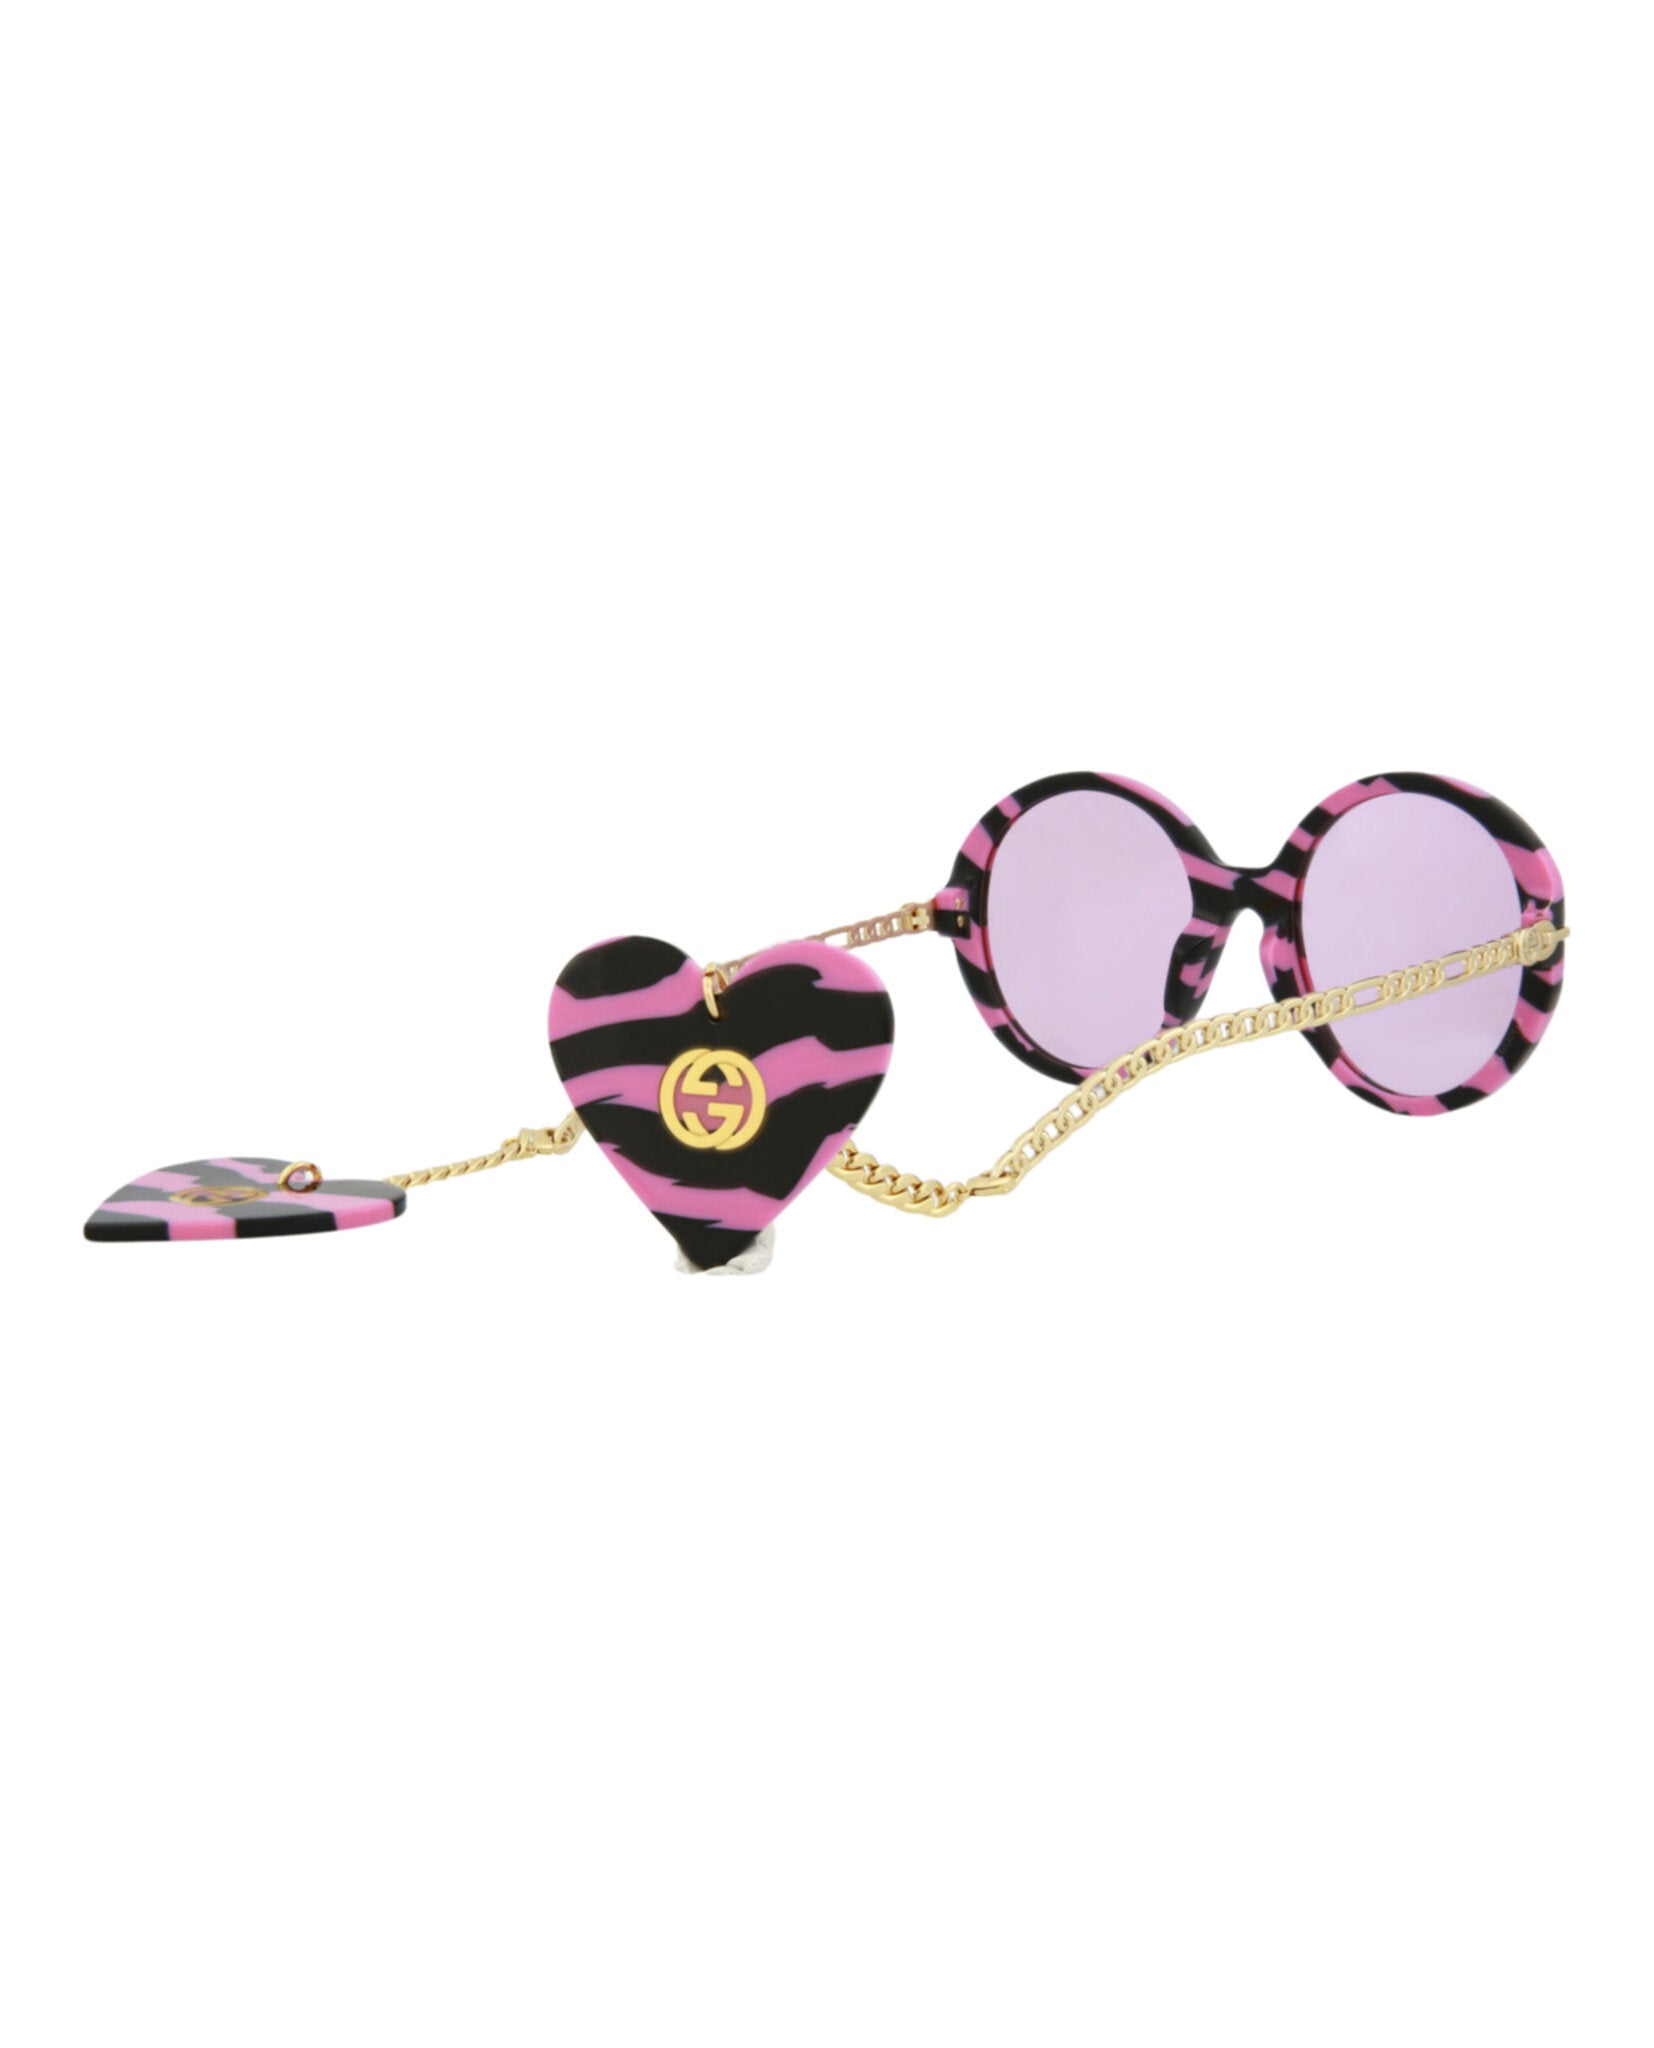 title:Gucci Women's GG0726S-30008878007 Novelty Sunglasses;color:Pink Gold Pink